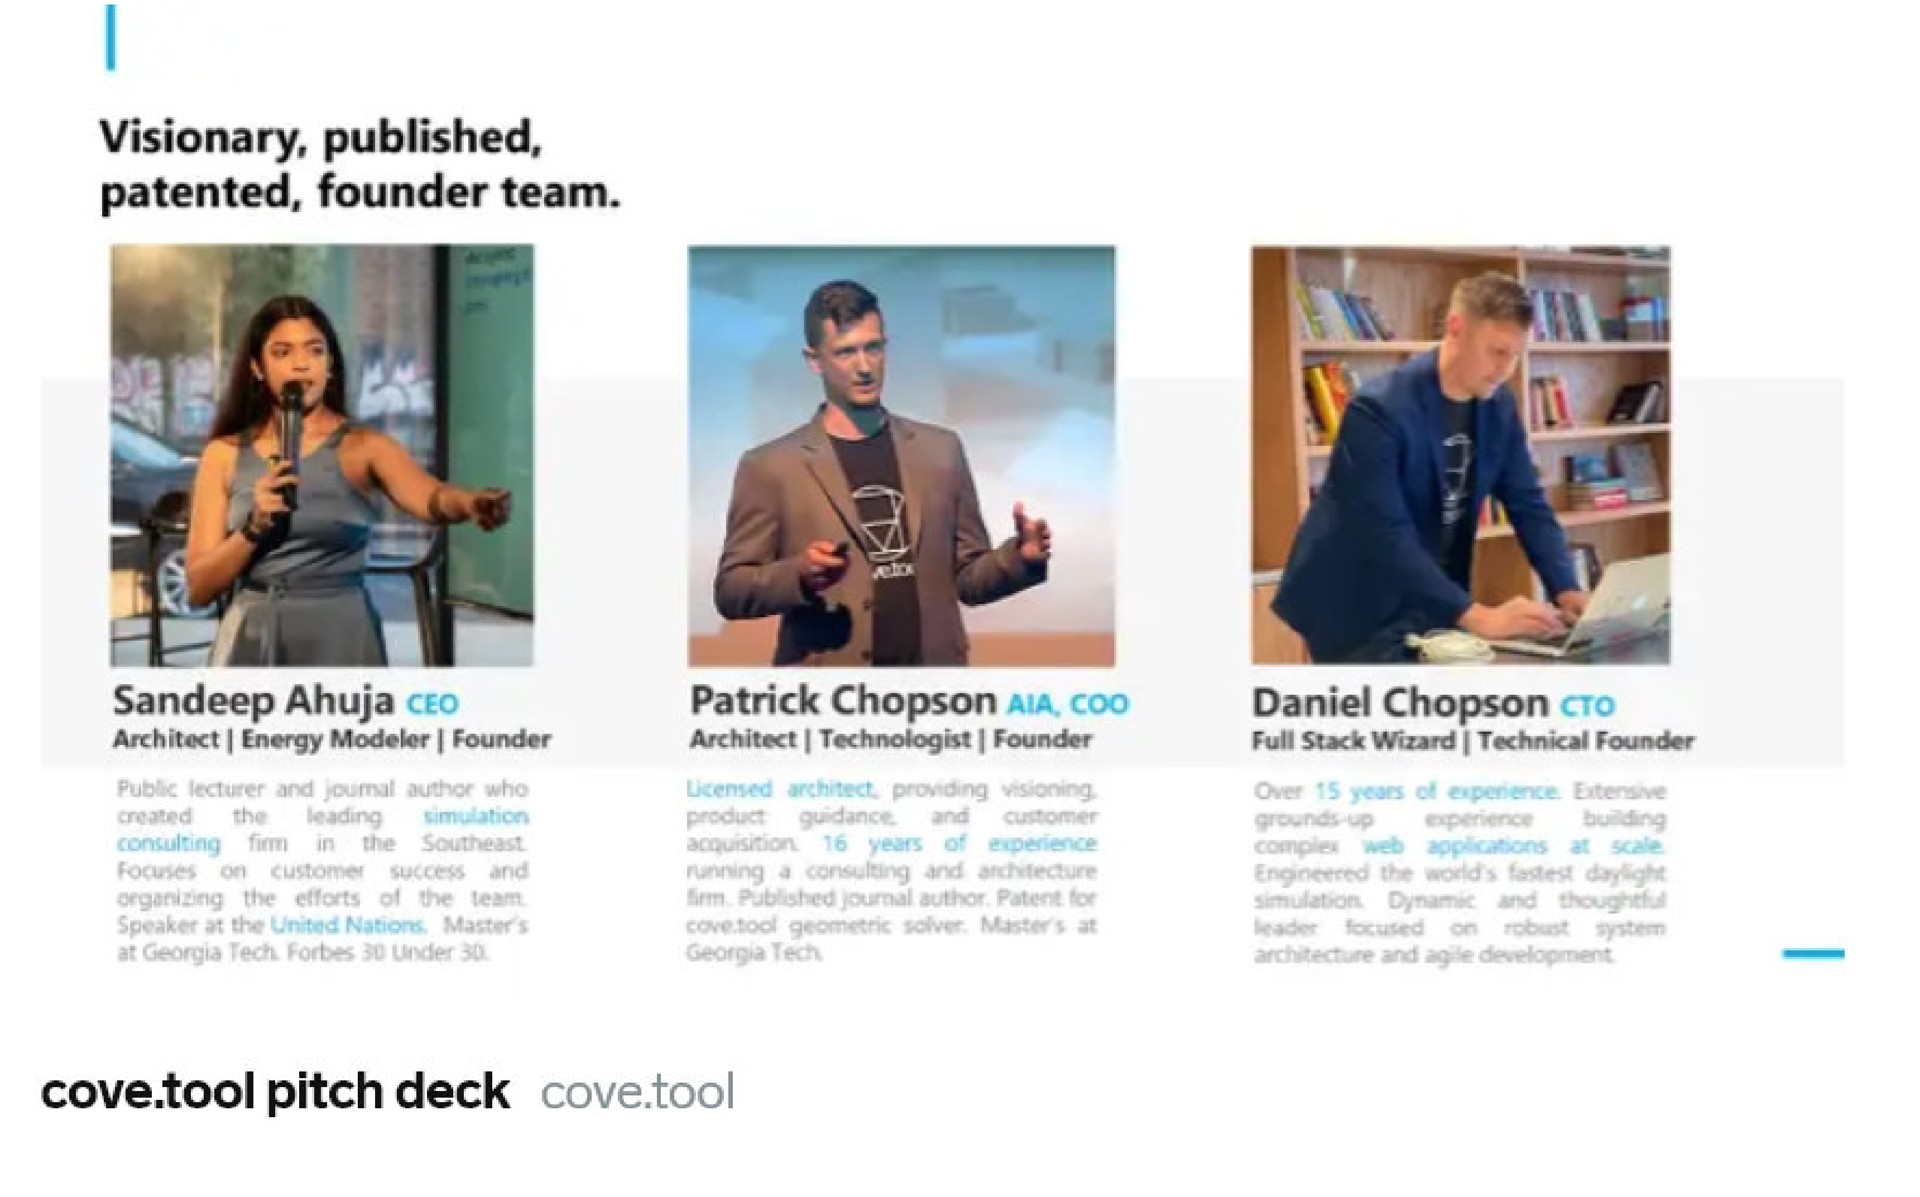 visionary published patented founder team cove tool pitch deck cove too | Covetool